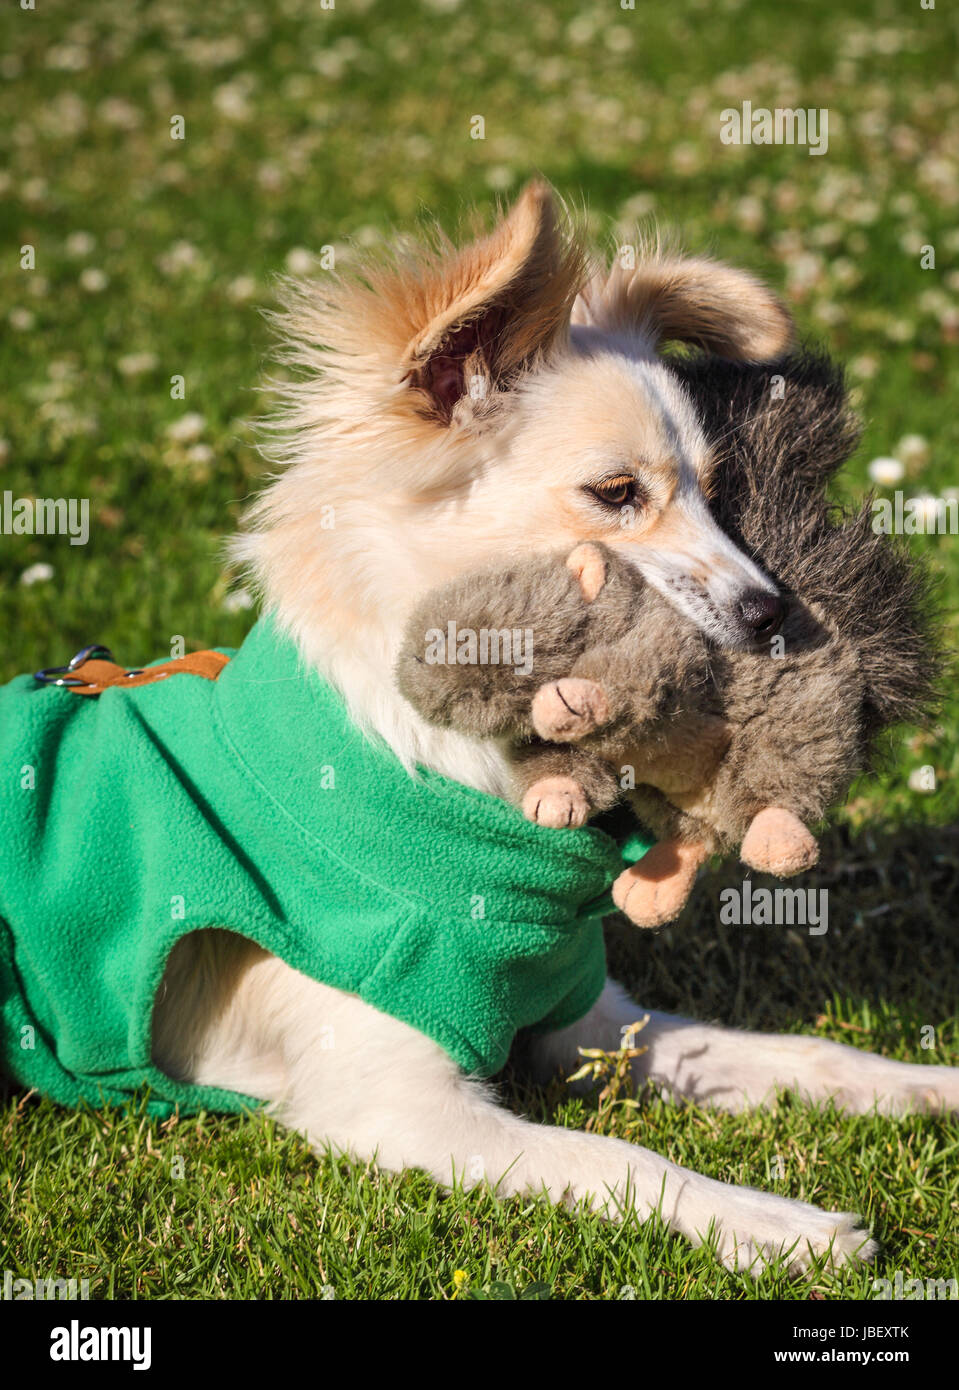 Puppy wearing fleece vest holds toy squirrel Stock Photo